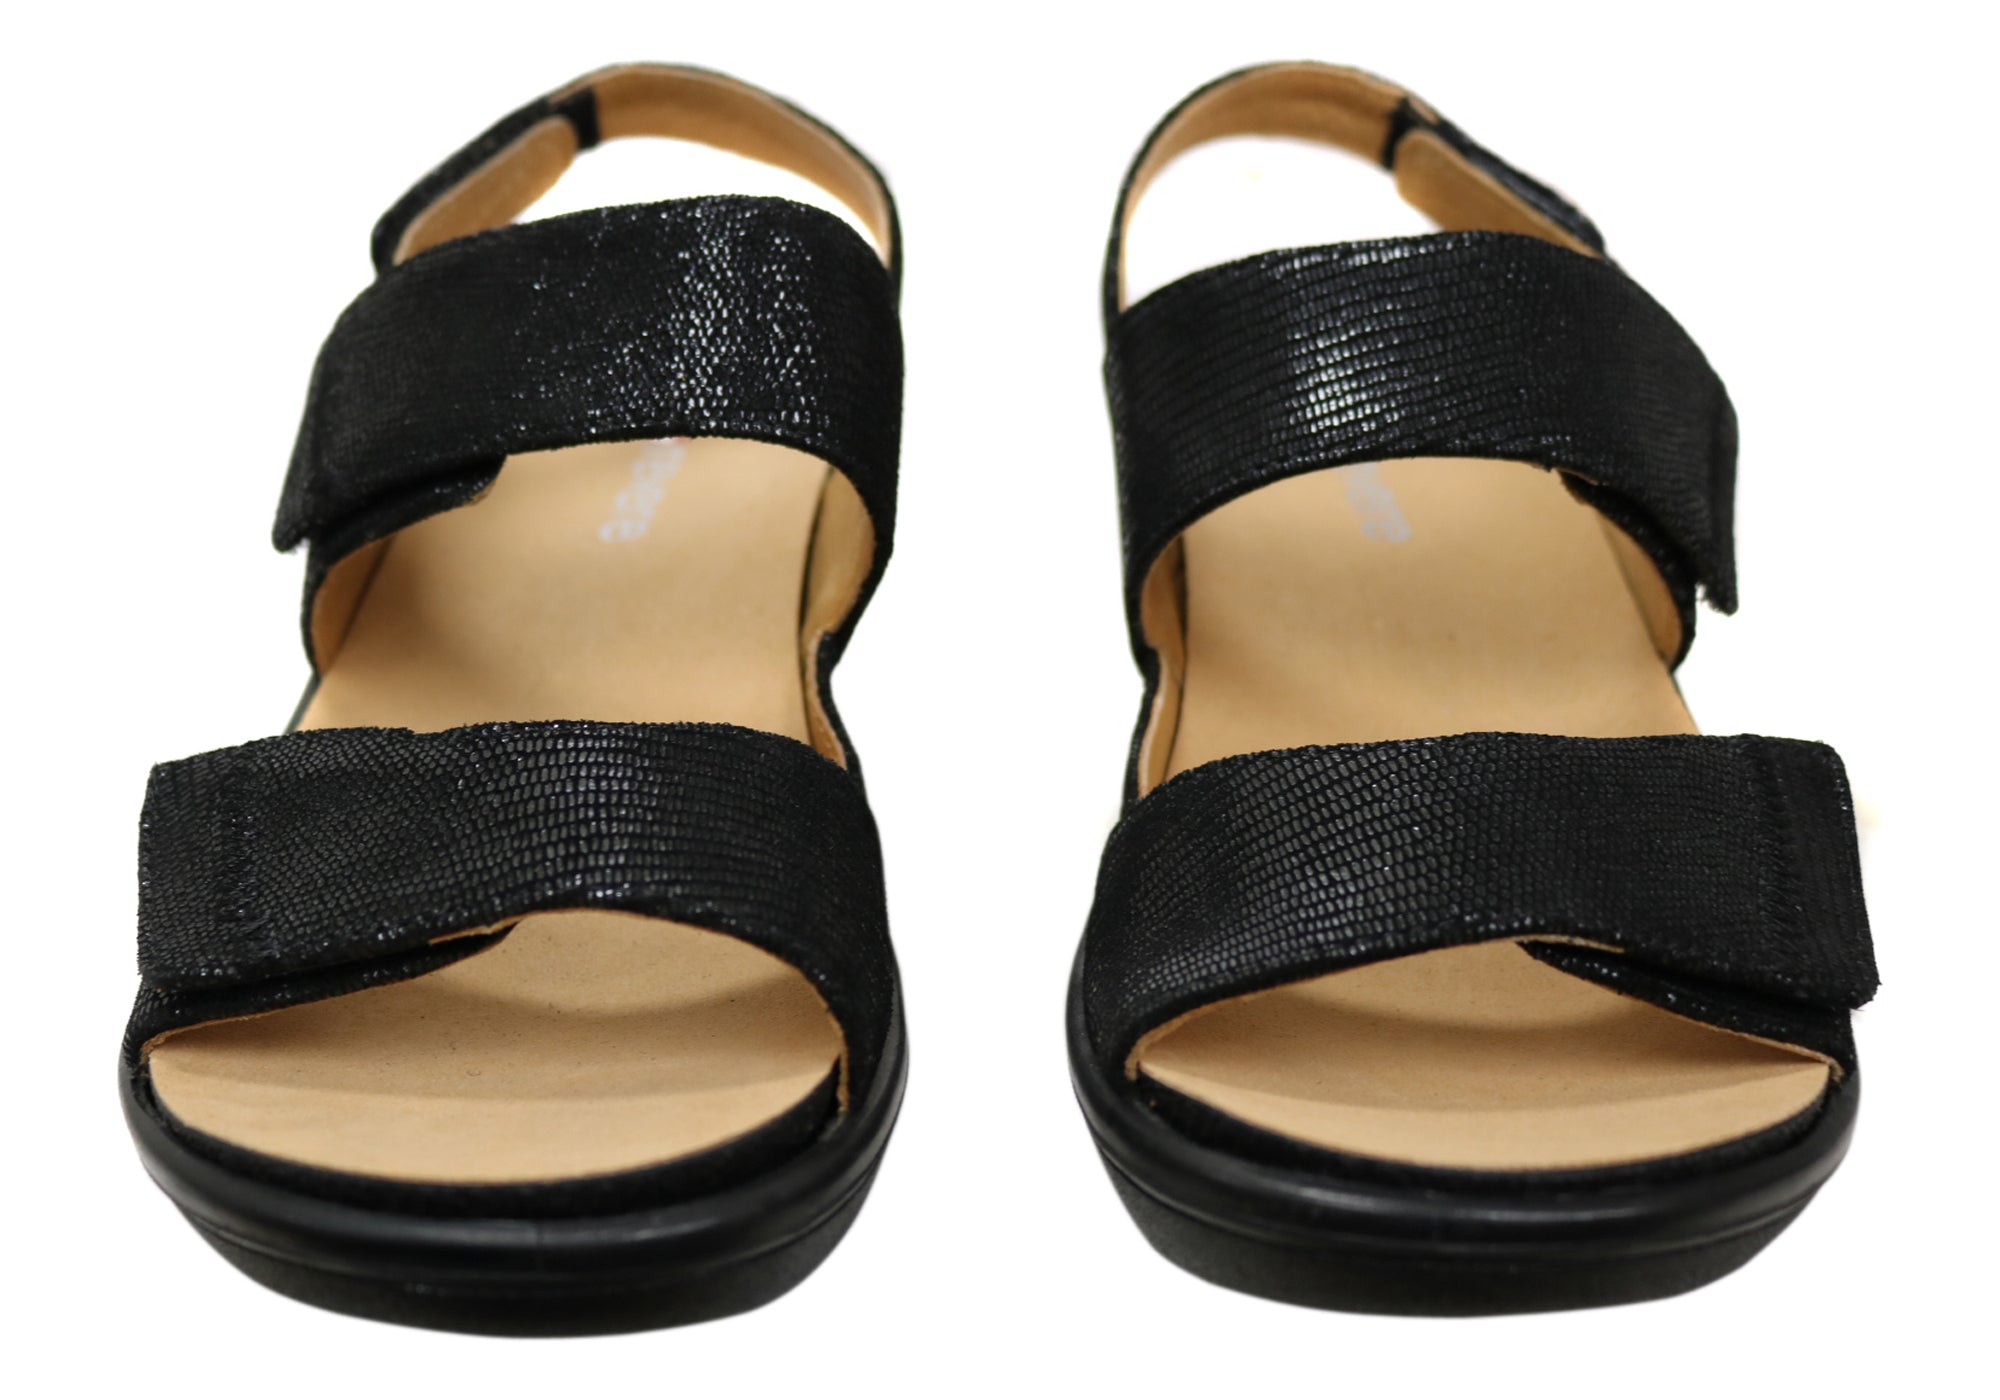 Revere Rosario Womens Wide Width Leather Back Strap Wedge Sandals